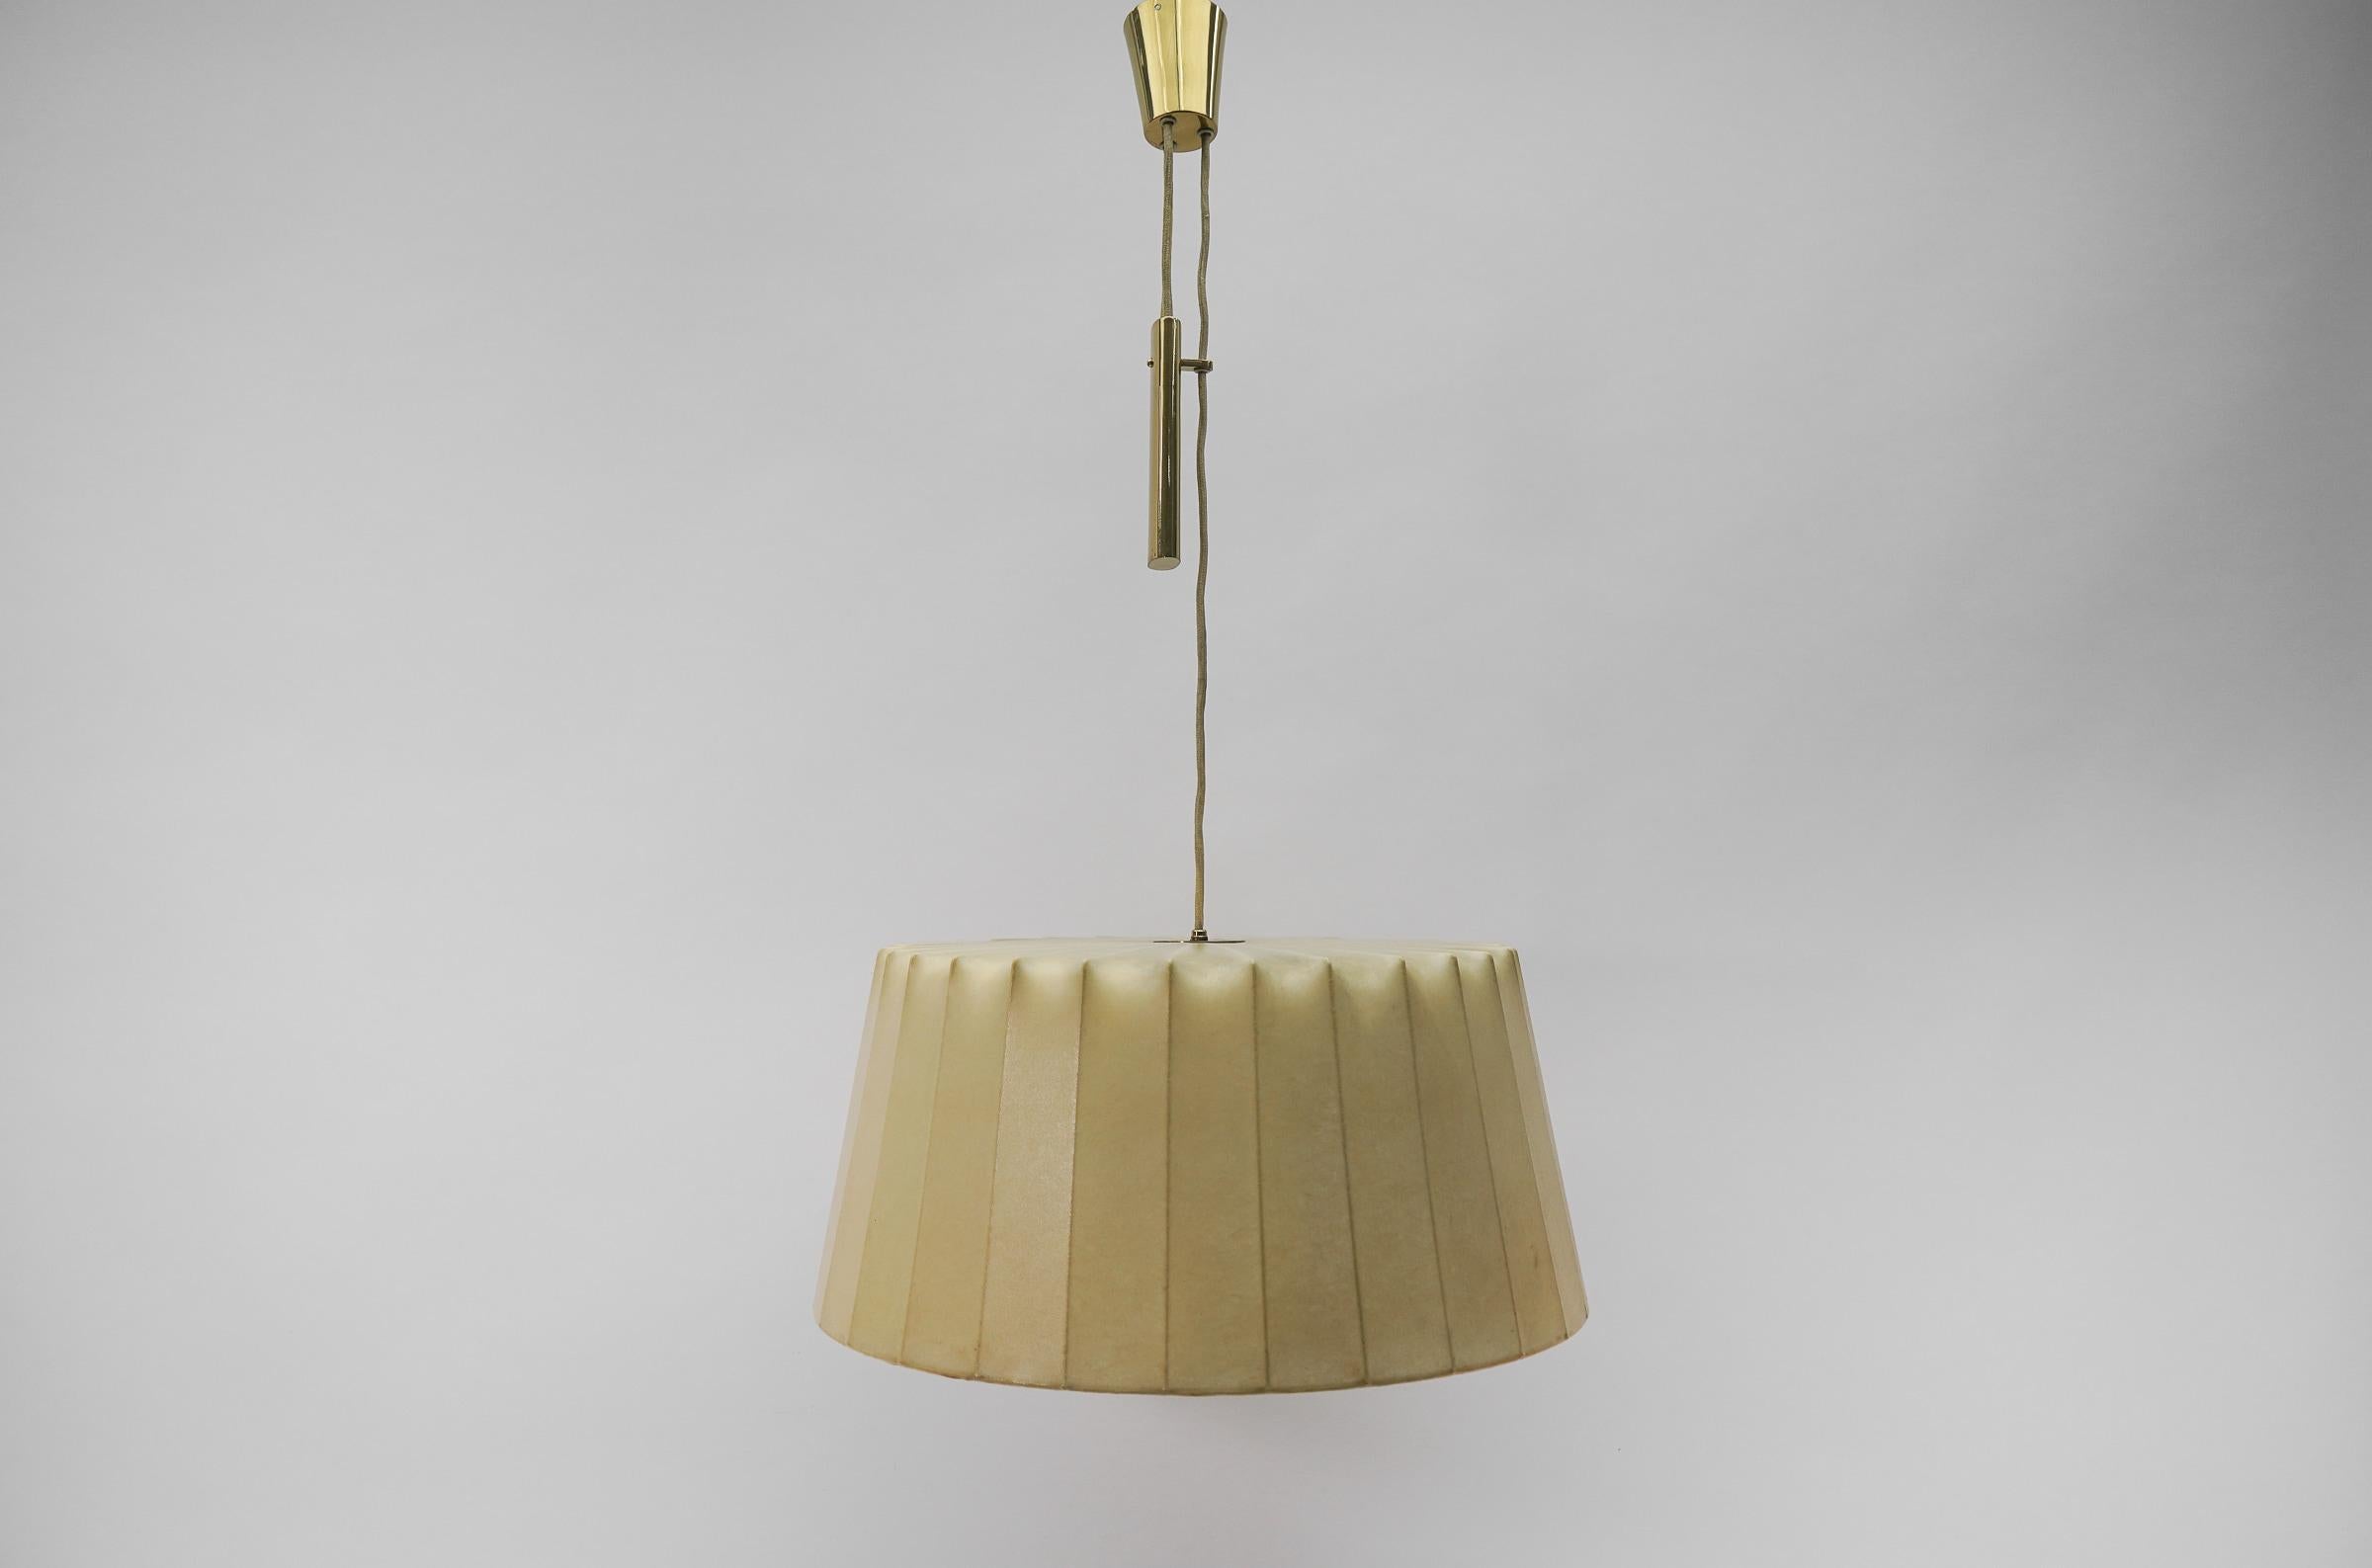 Lovely Cocoon Counterweight Hanging Lamp by Münchener Werkstätten, 1950s Germany For Sale 2